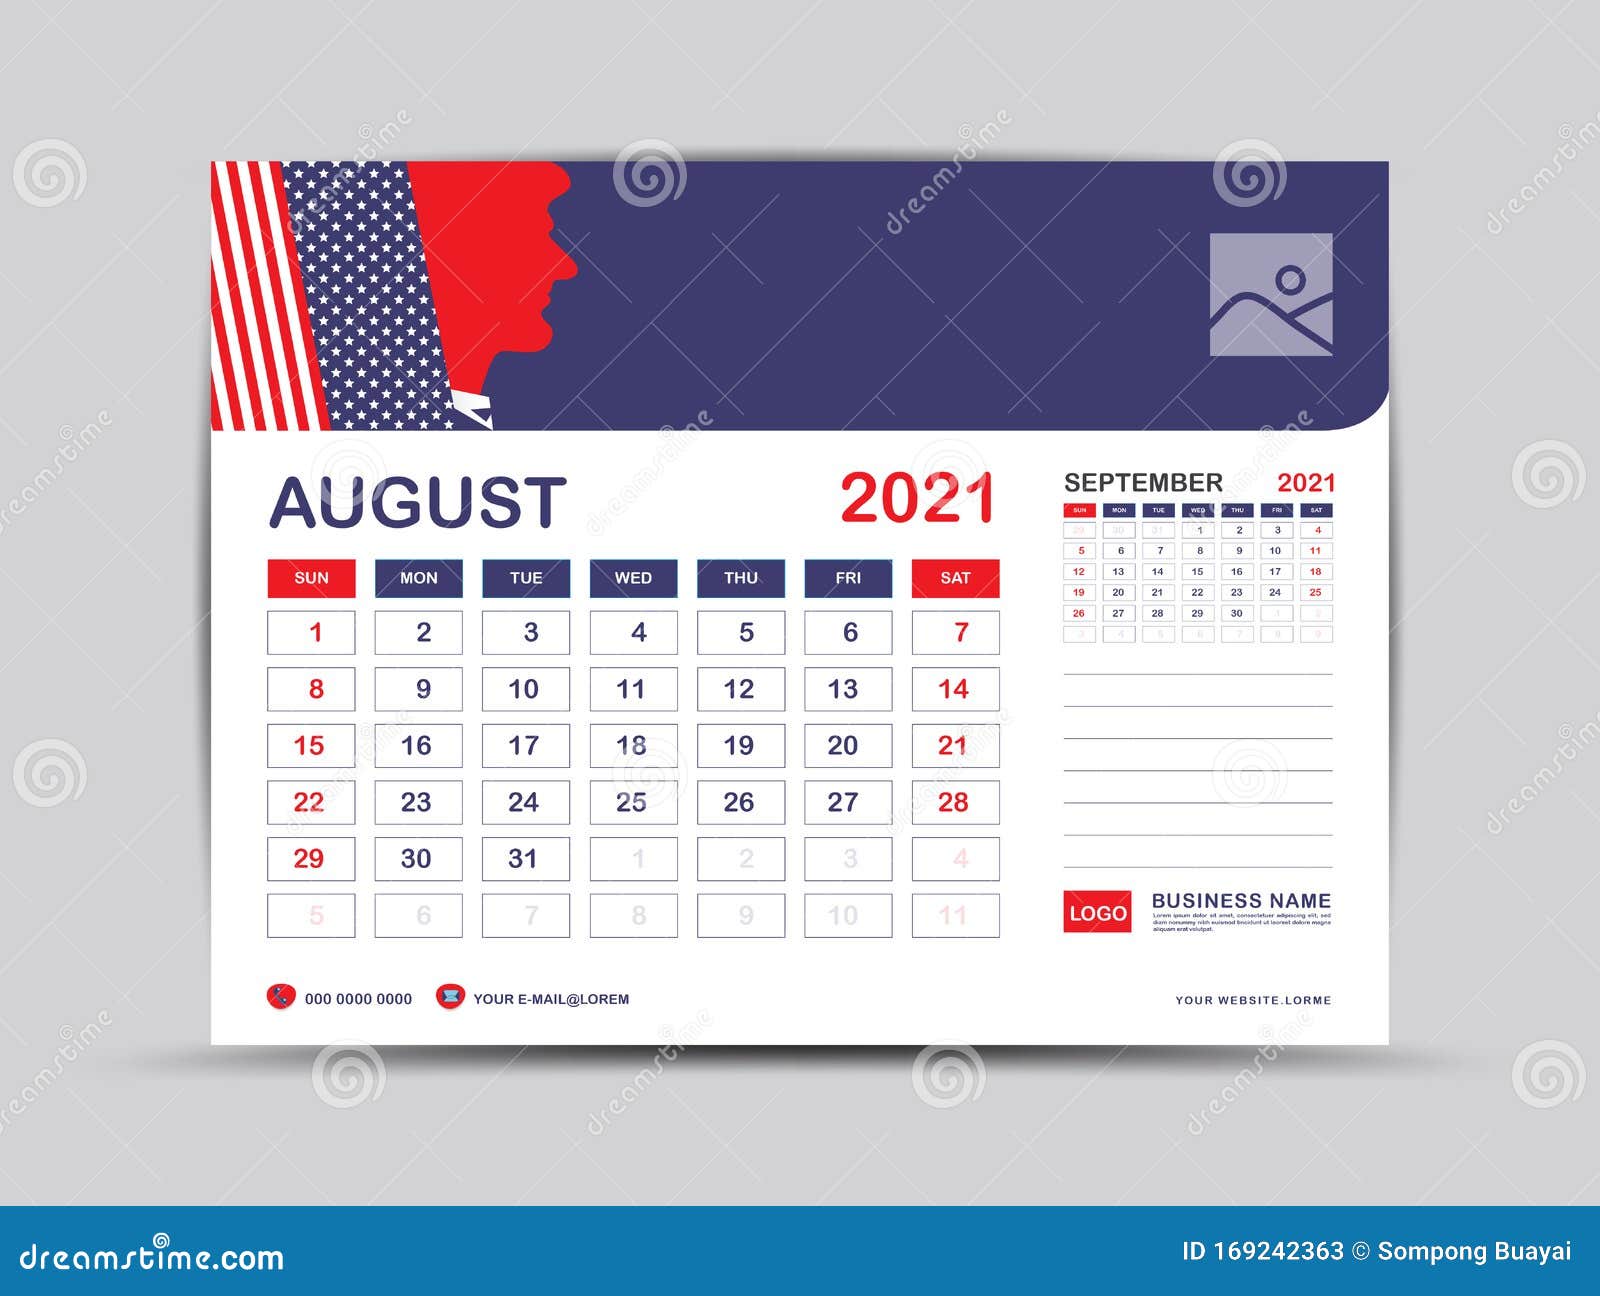 Desk Calendar 2021 Template, August Page Vector For